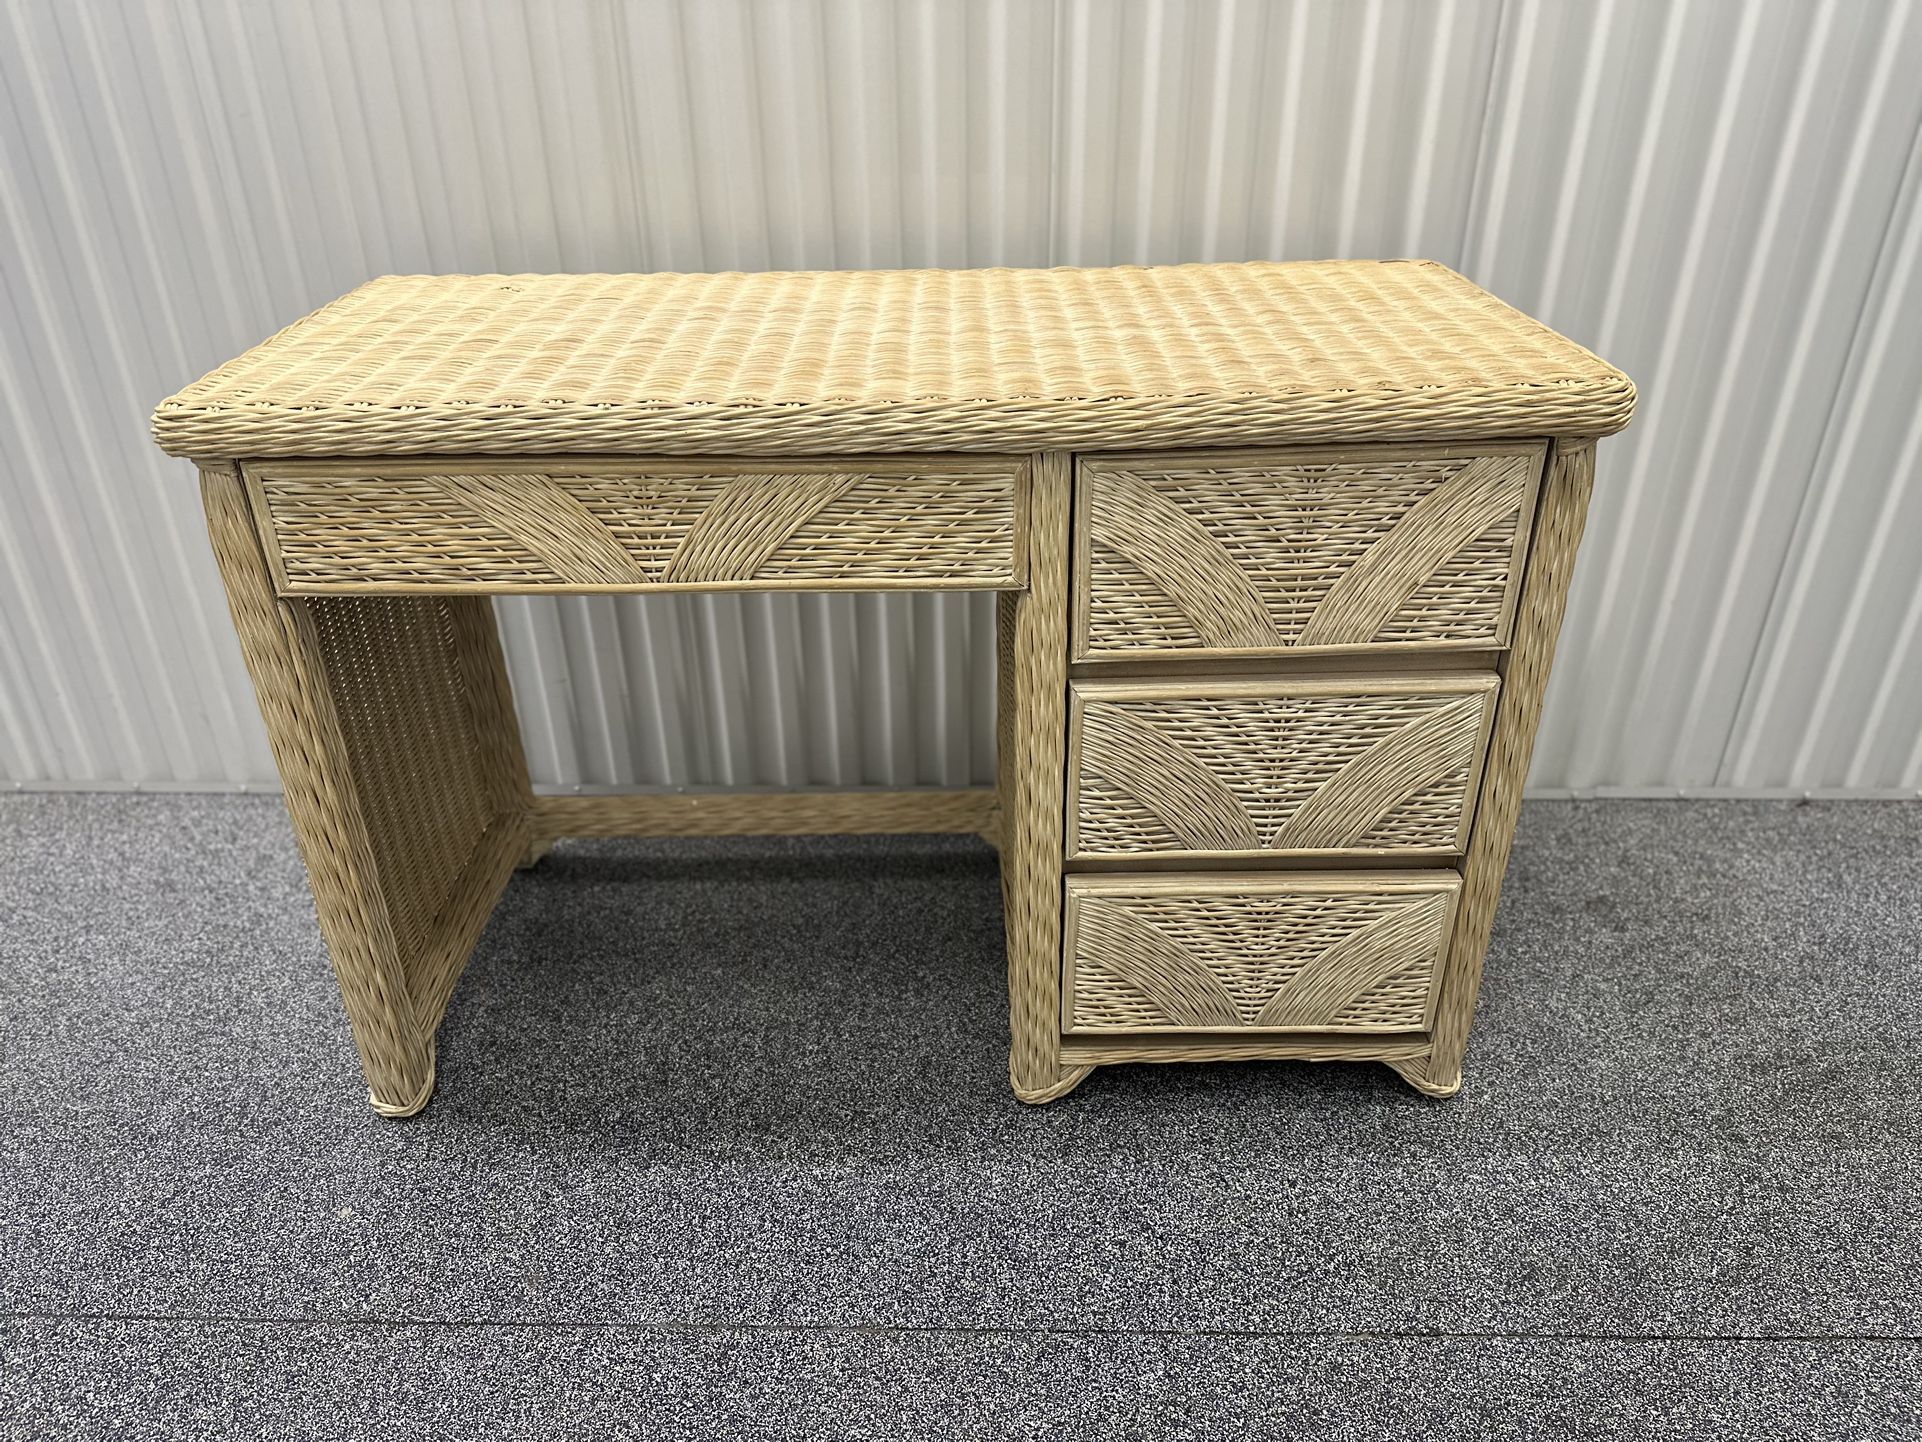 Vintage Boho Chic Wicker Rattan Desk/Vanity With Matching Chair